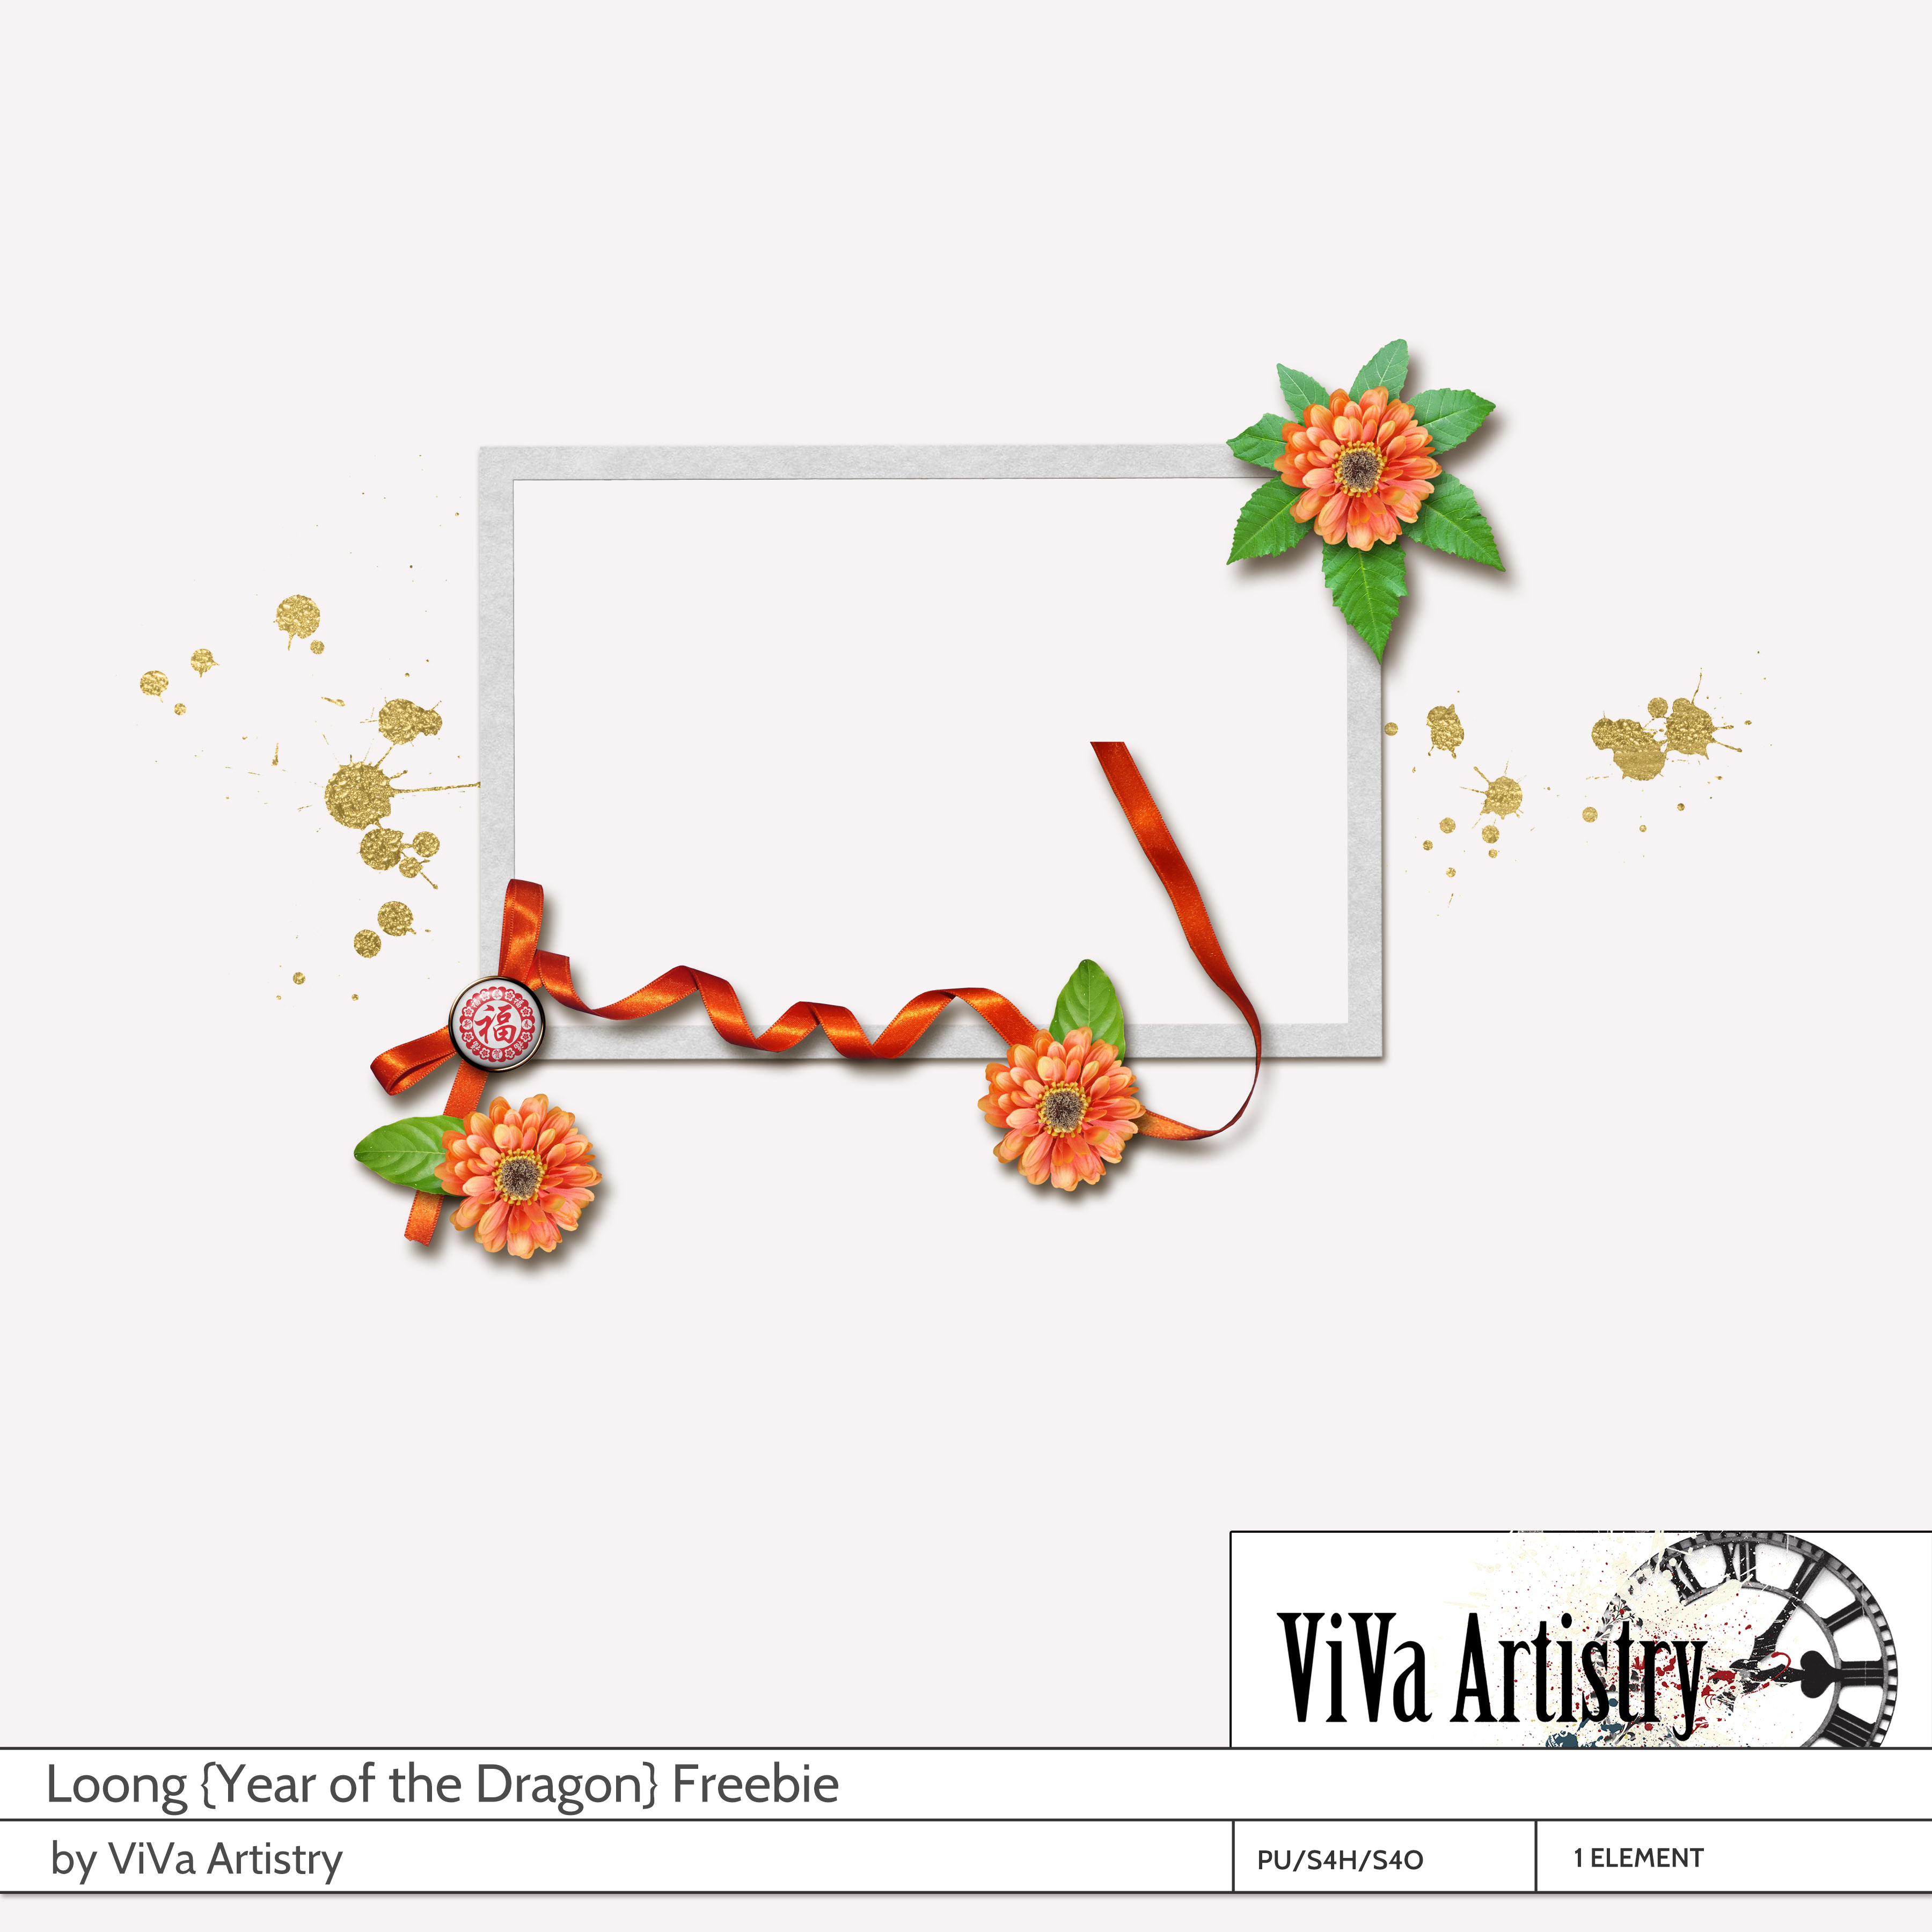 Loong (Year of the Dragon) freebie